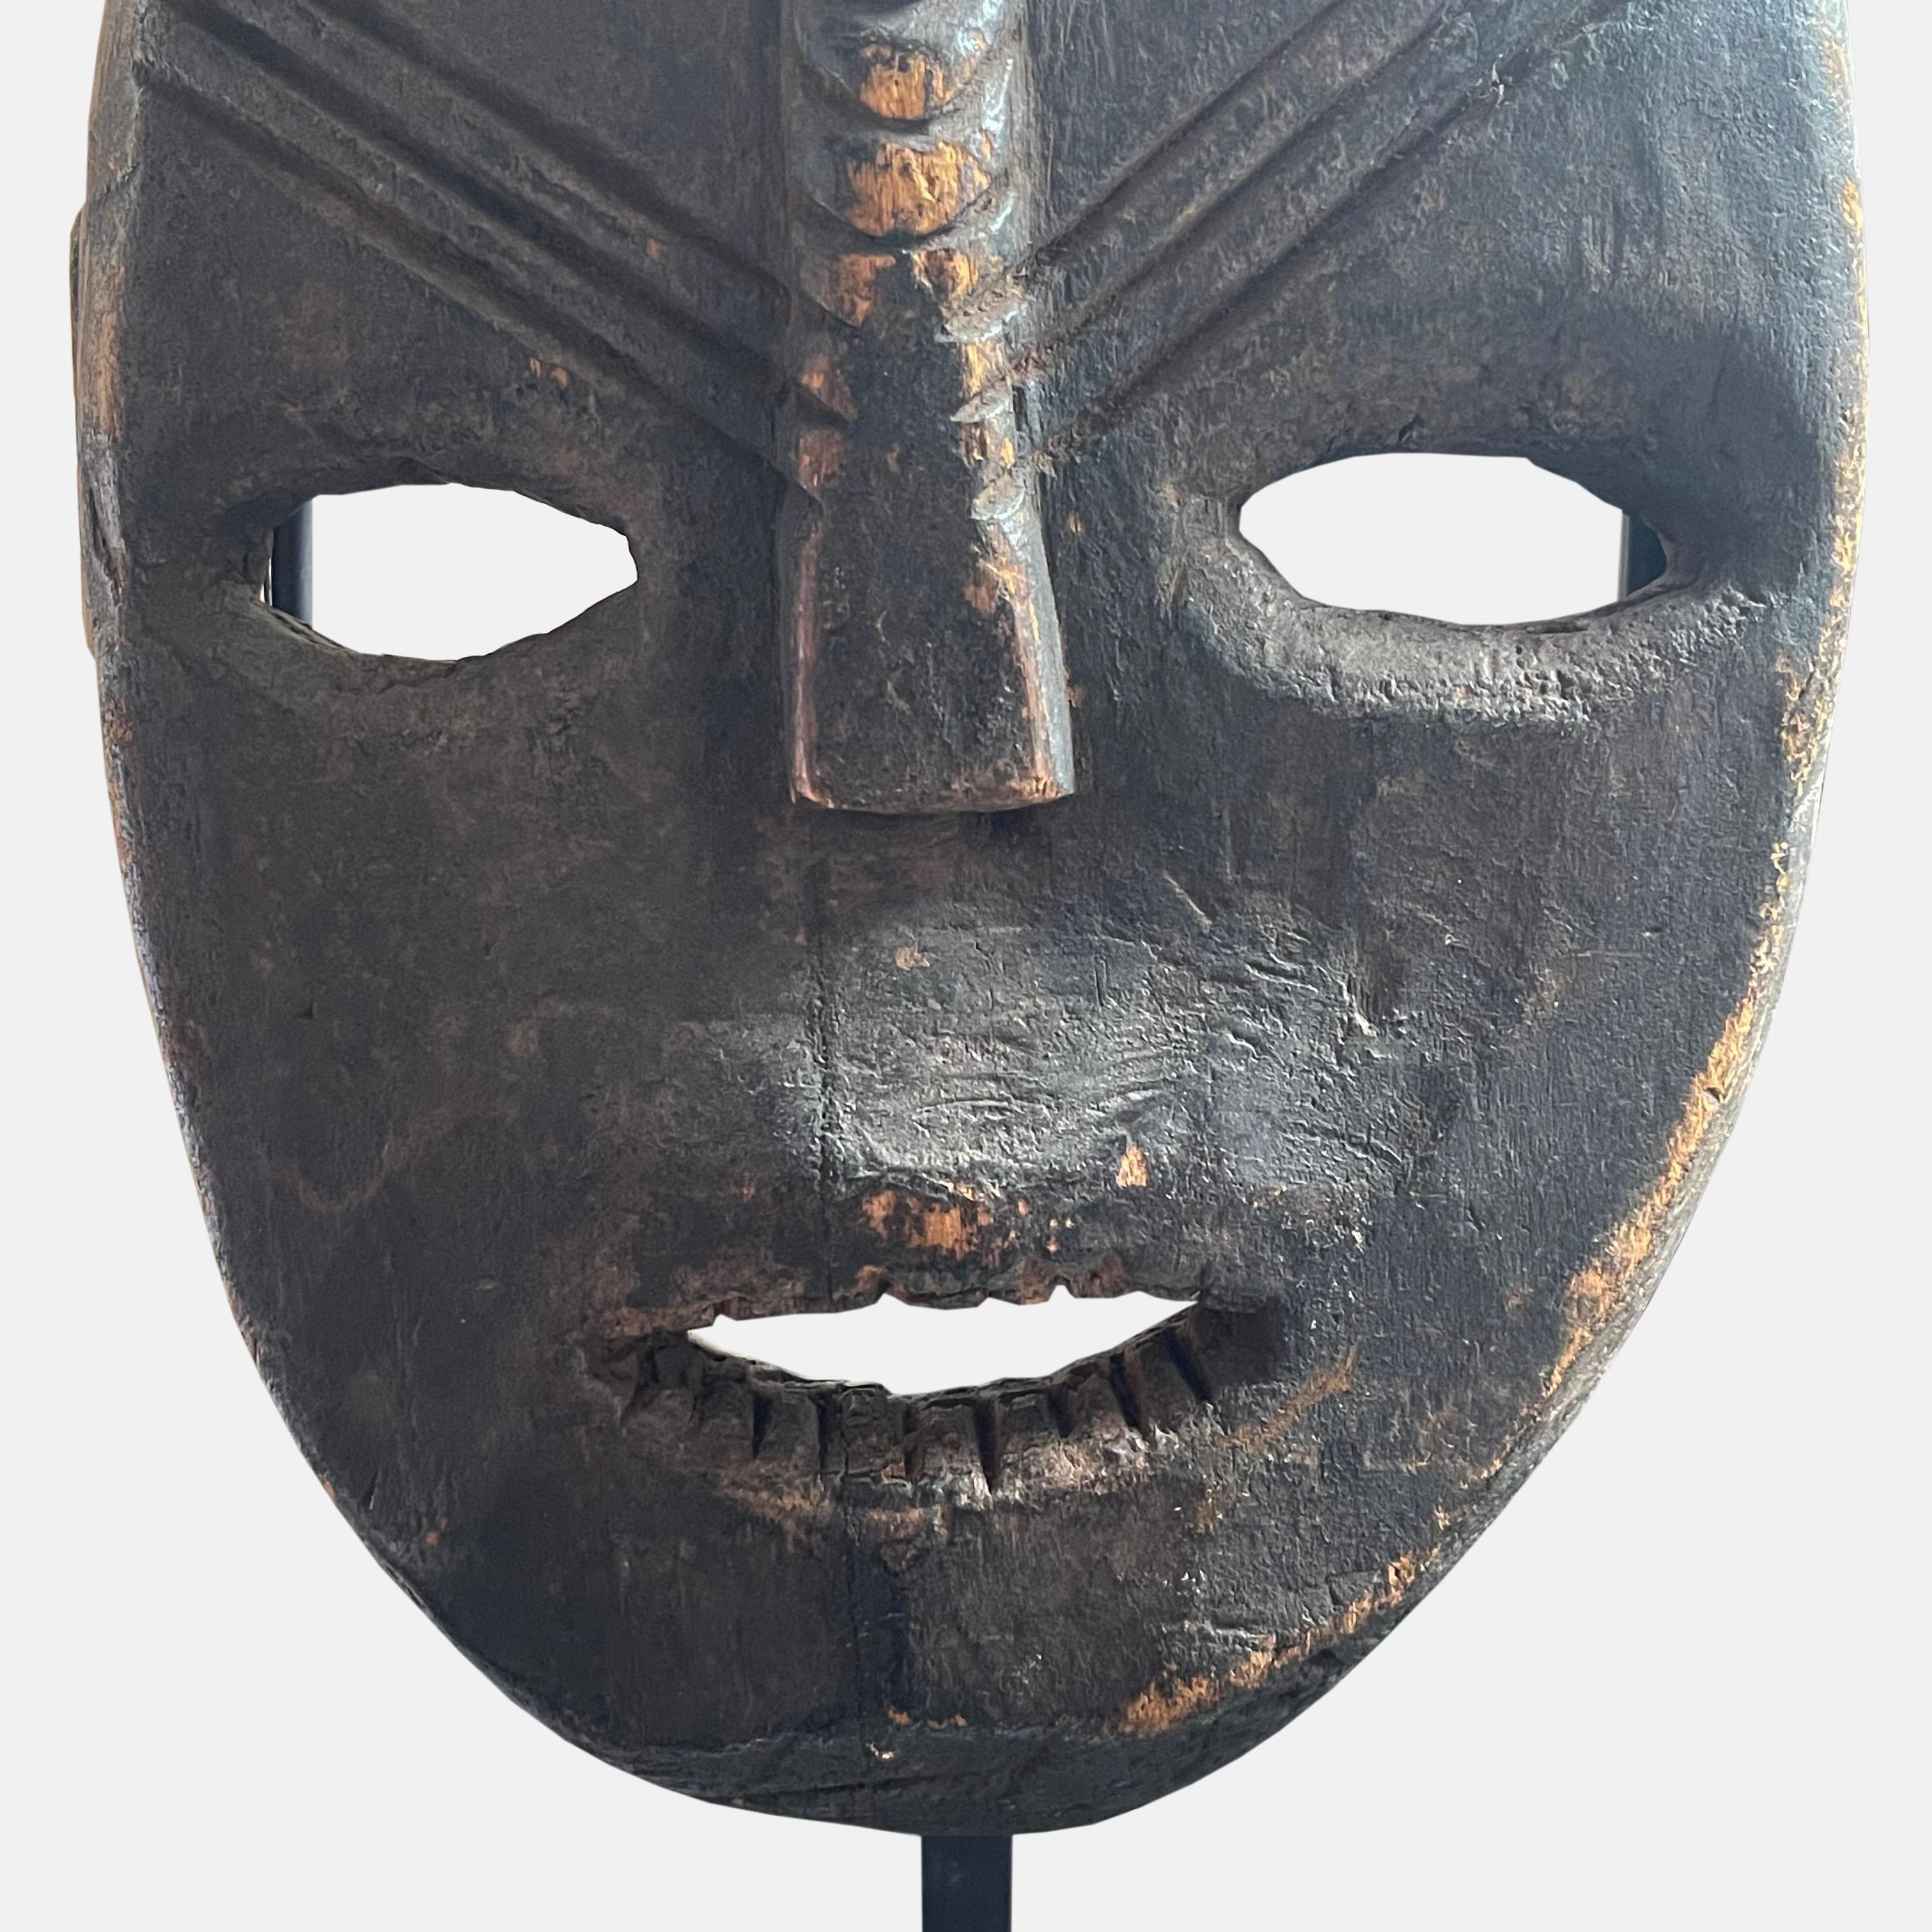 Ngbaka Congolese Tribal Mask for Initiation Rituals, Early 20th Century For Sale 1